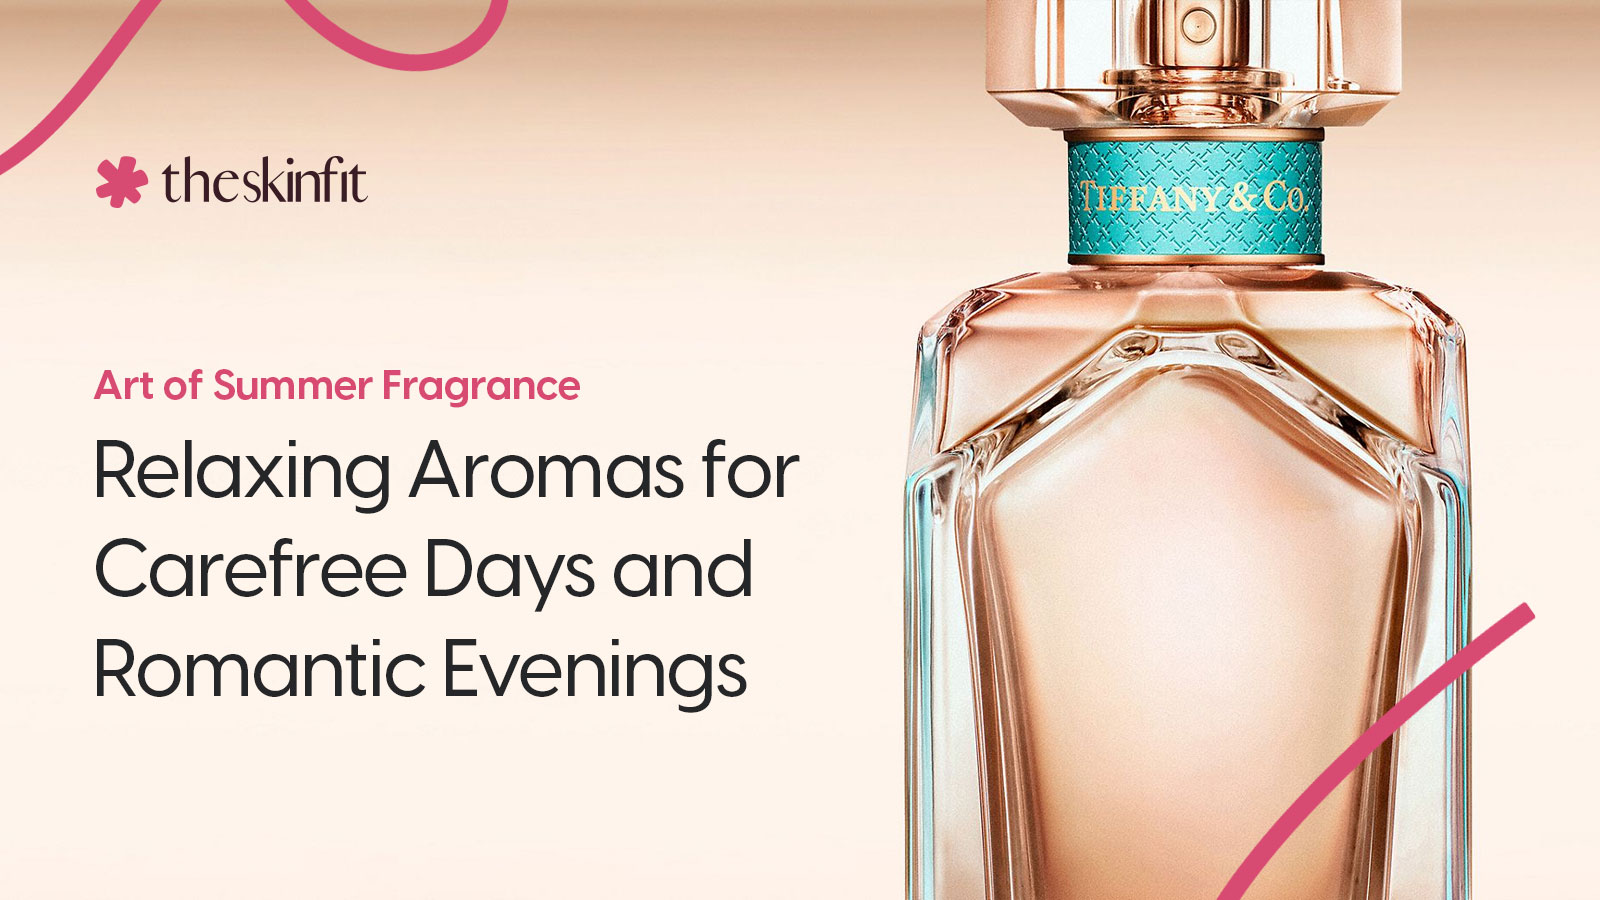 Art of Summer Fragrance: Relaxing Aromas for Carefree Days and Romantic Evenings